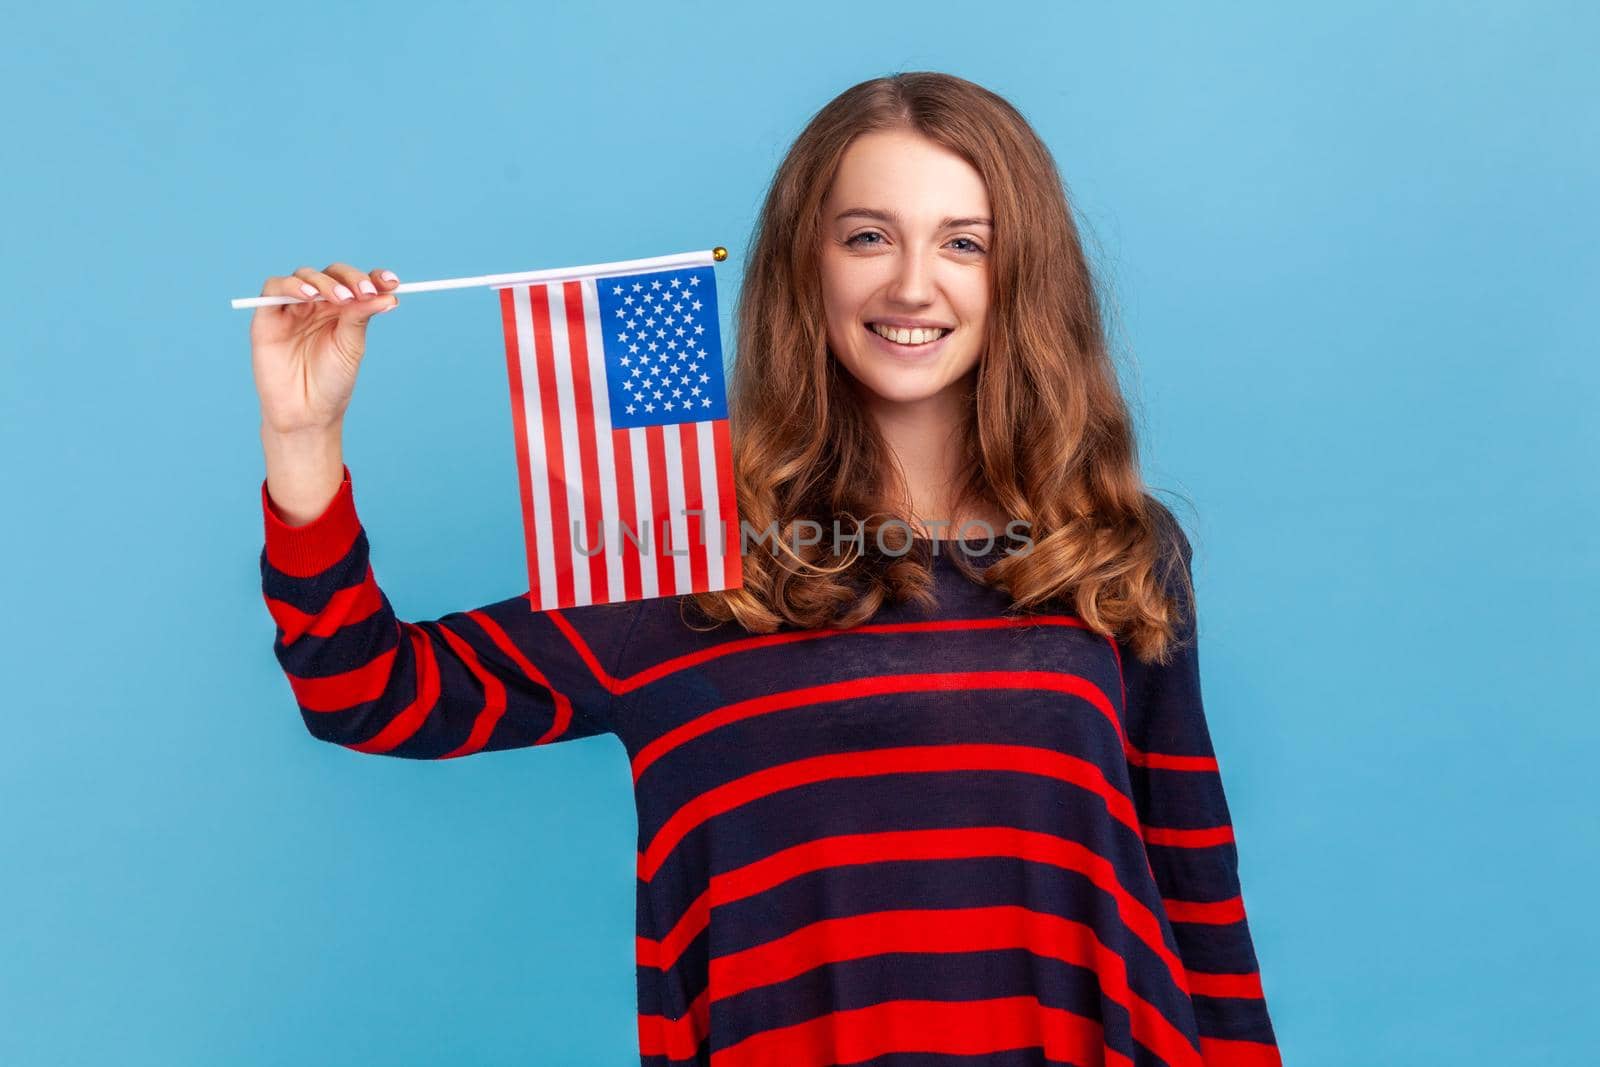 Good looking woman wearing striped casual style sweater, waving united states of america flag, celebrating national holiday, patriotism, independence. Indoor studio shot isolated on blue background.